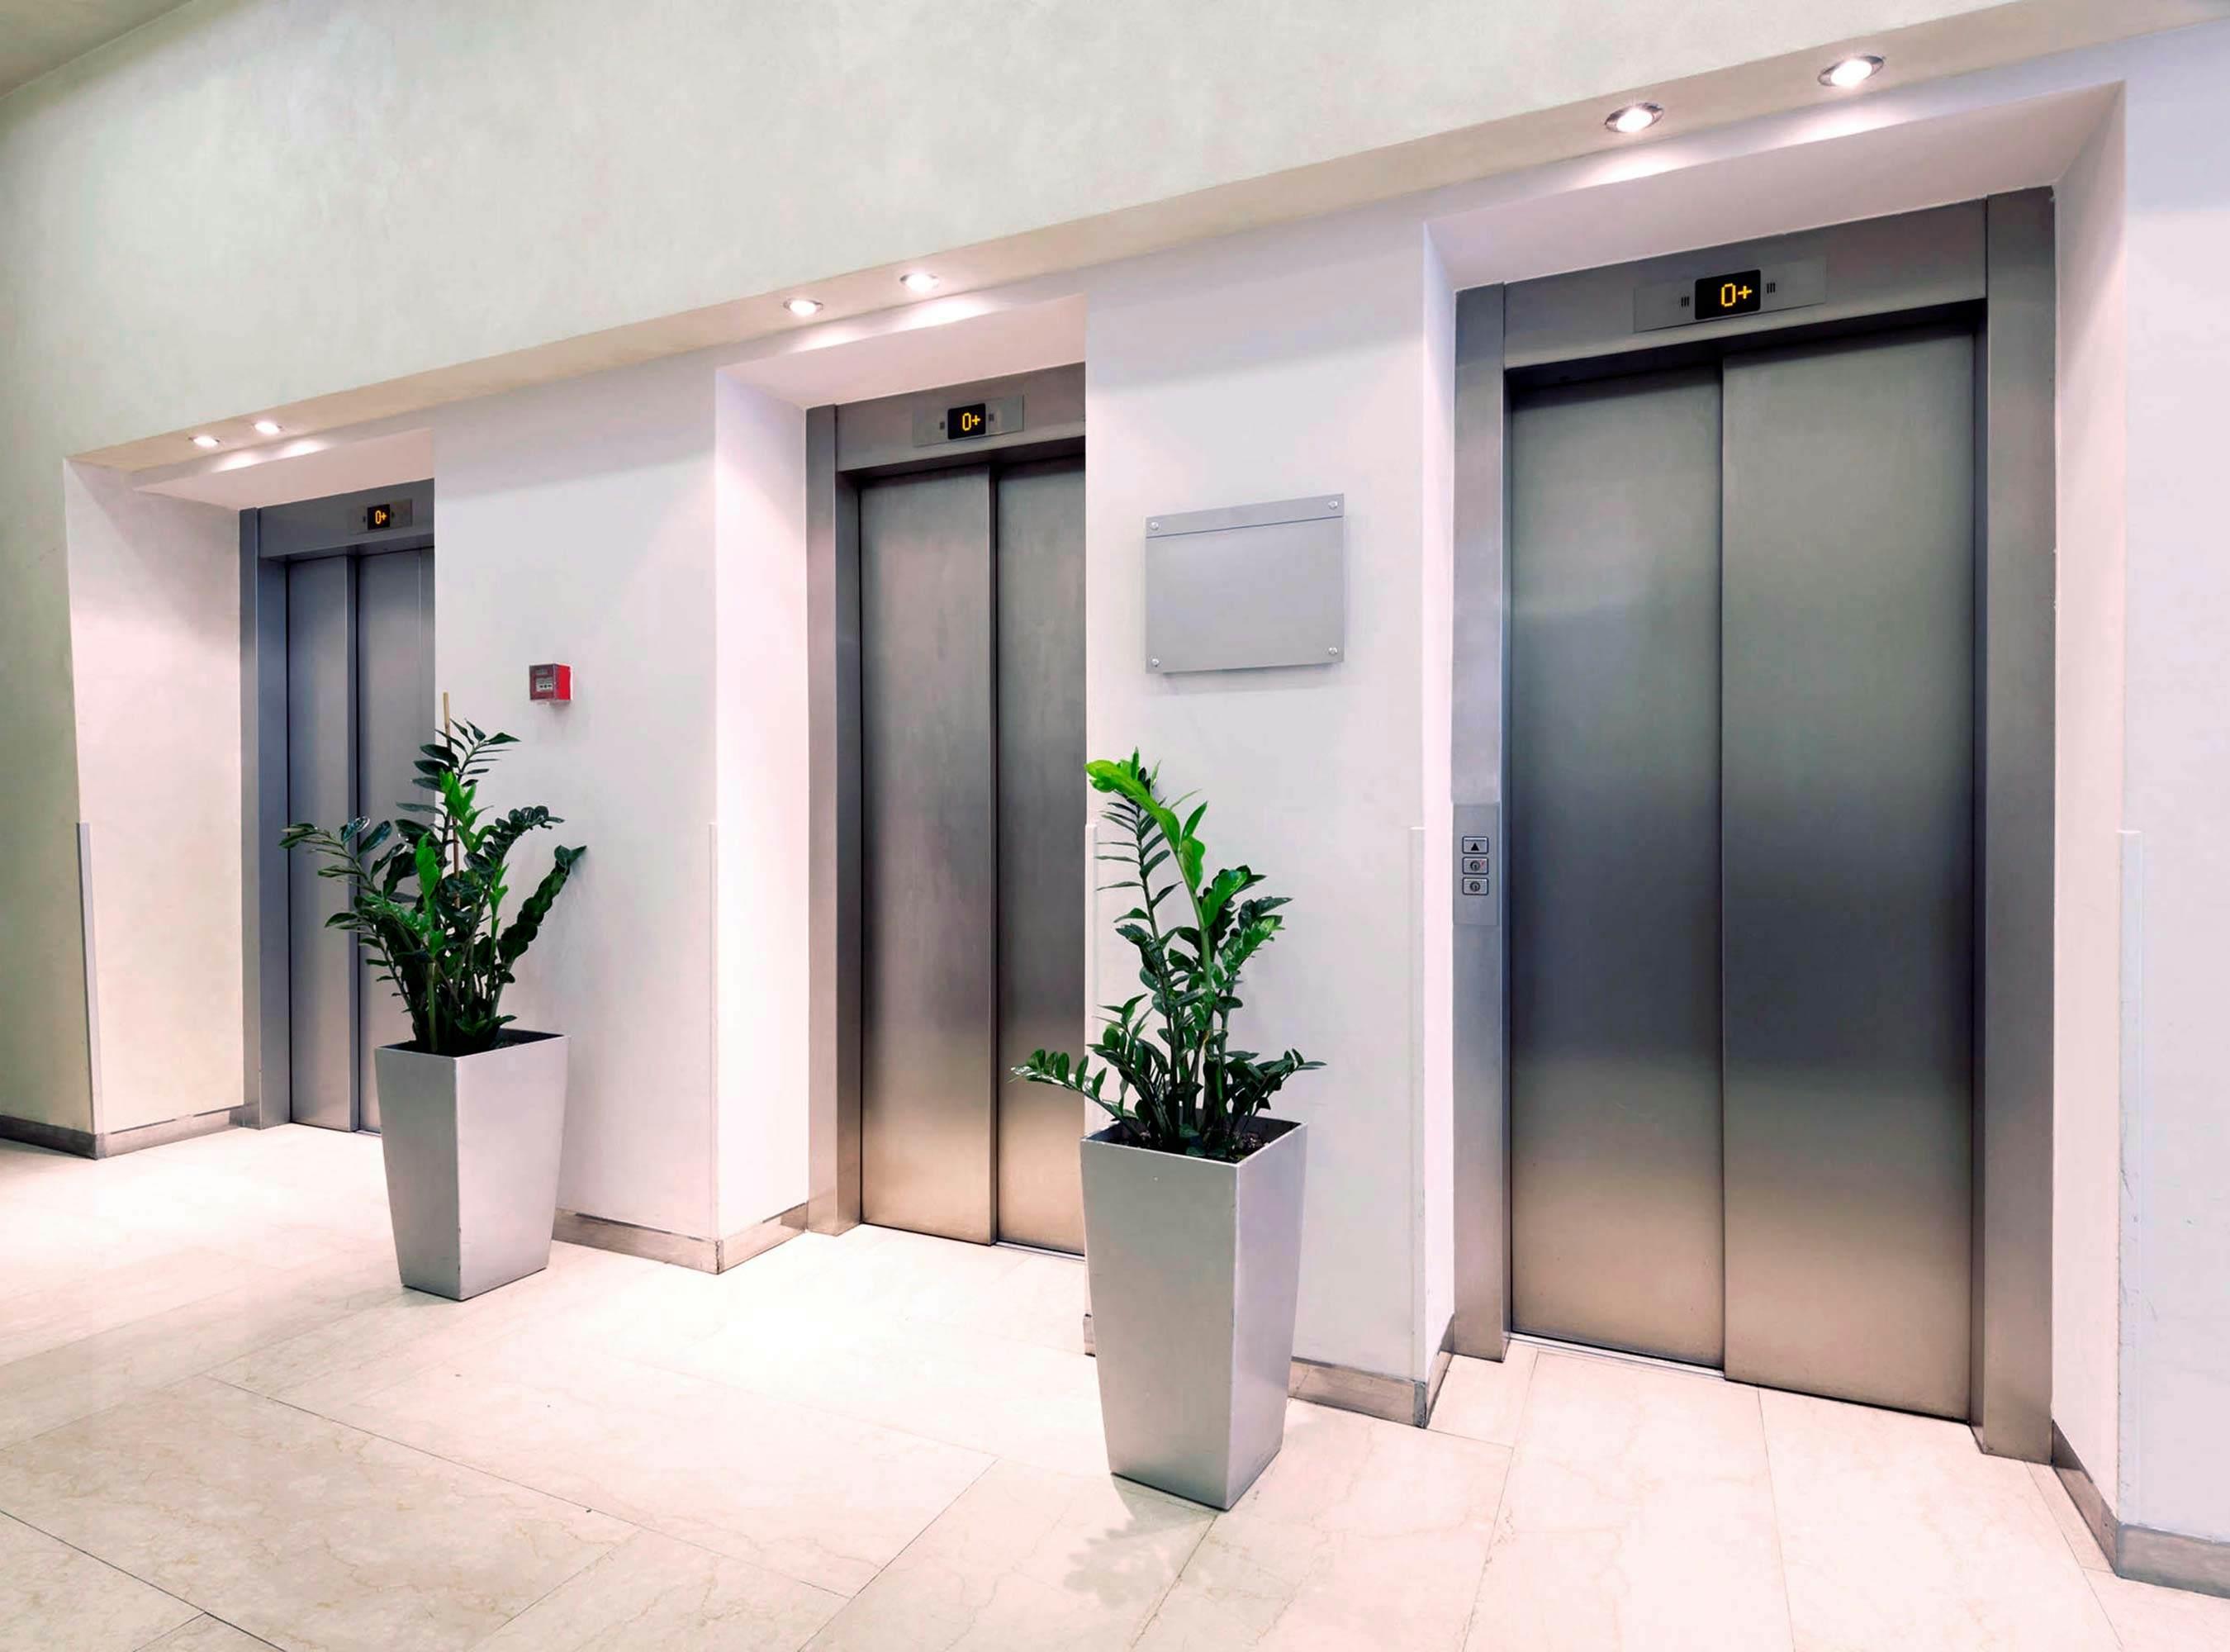 Elevator Accident Litigation: The Role of the Expert Witness